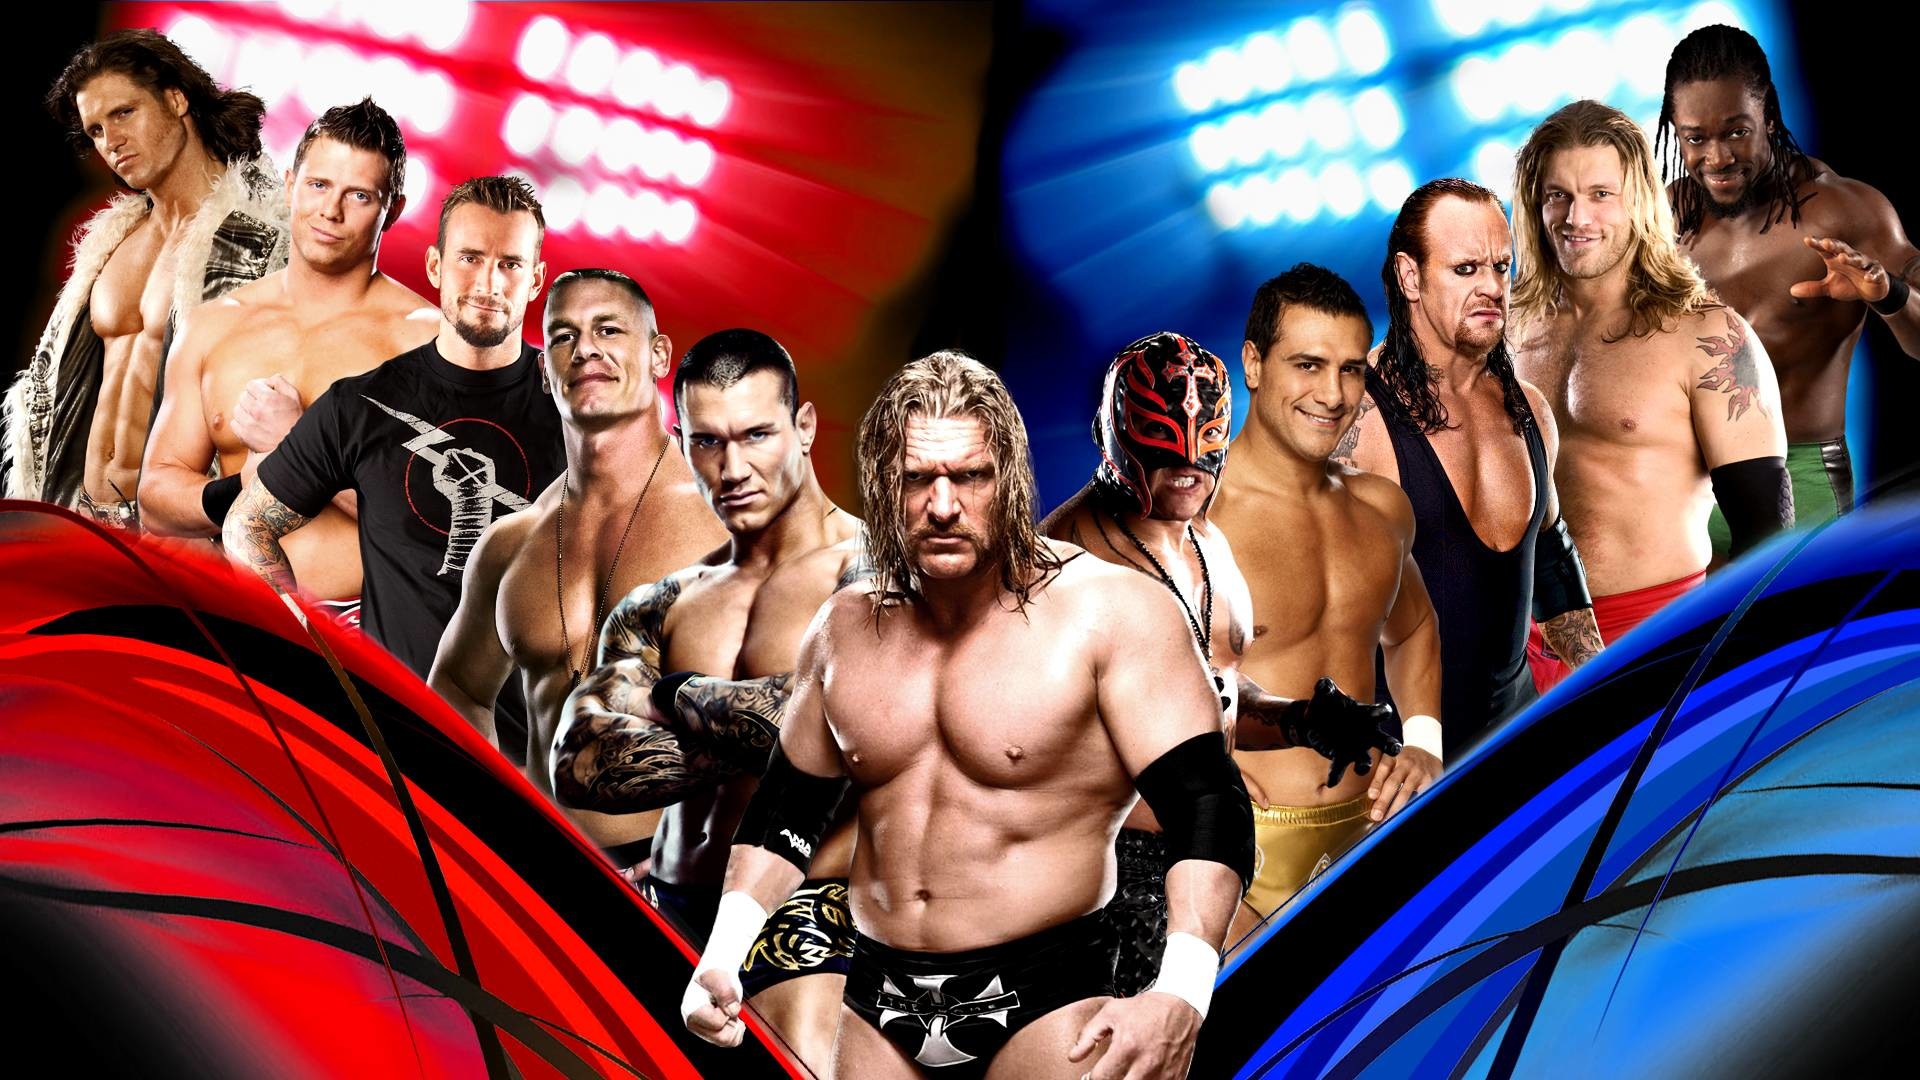 New Cover And Wallpaper I Made - Smackdown Vs Raw , HD Wallpaper & Backgrounds